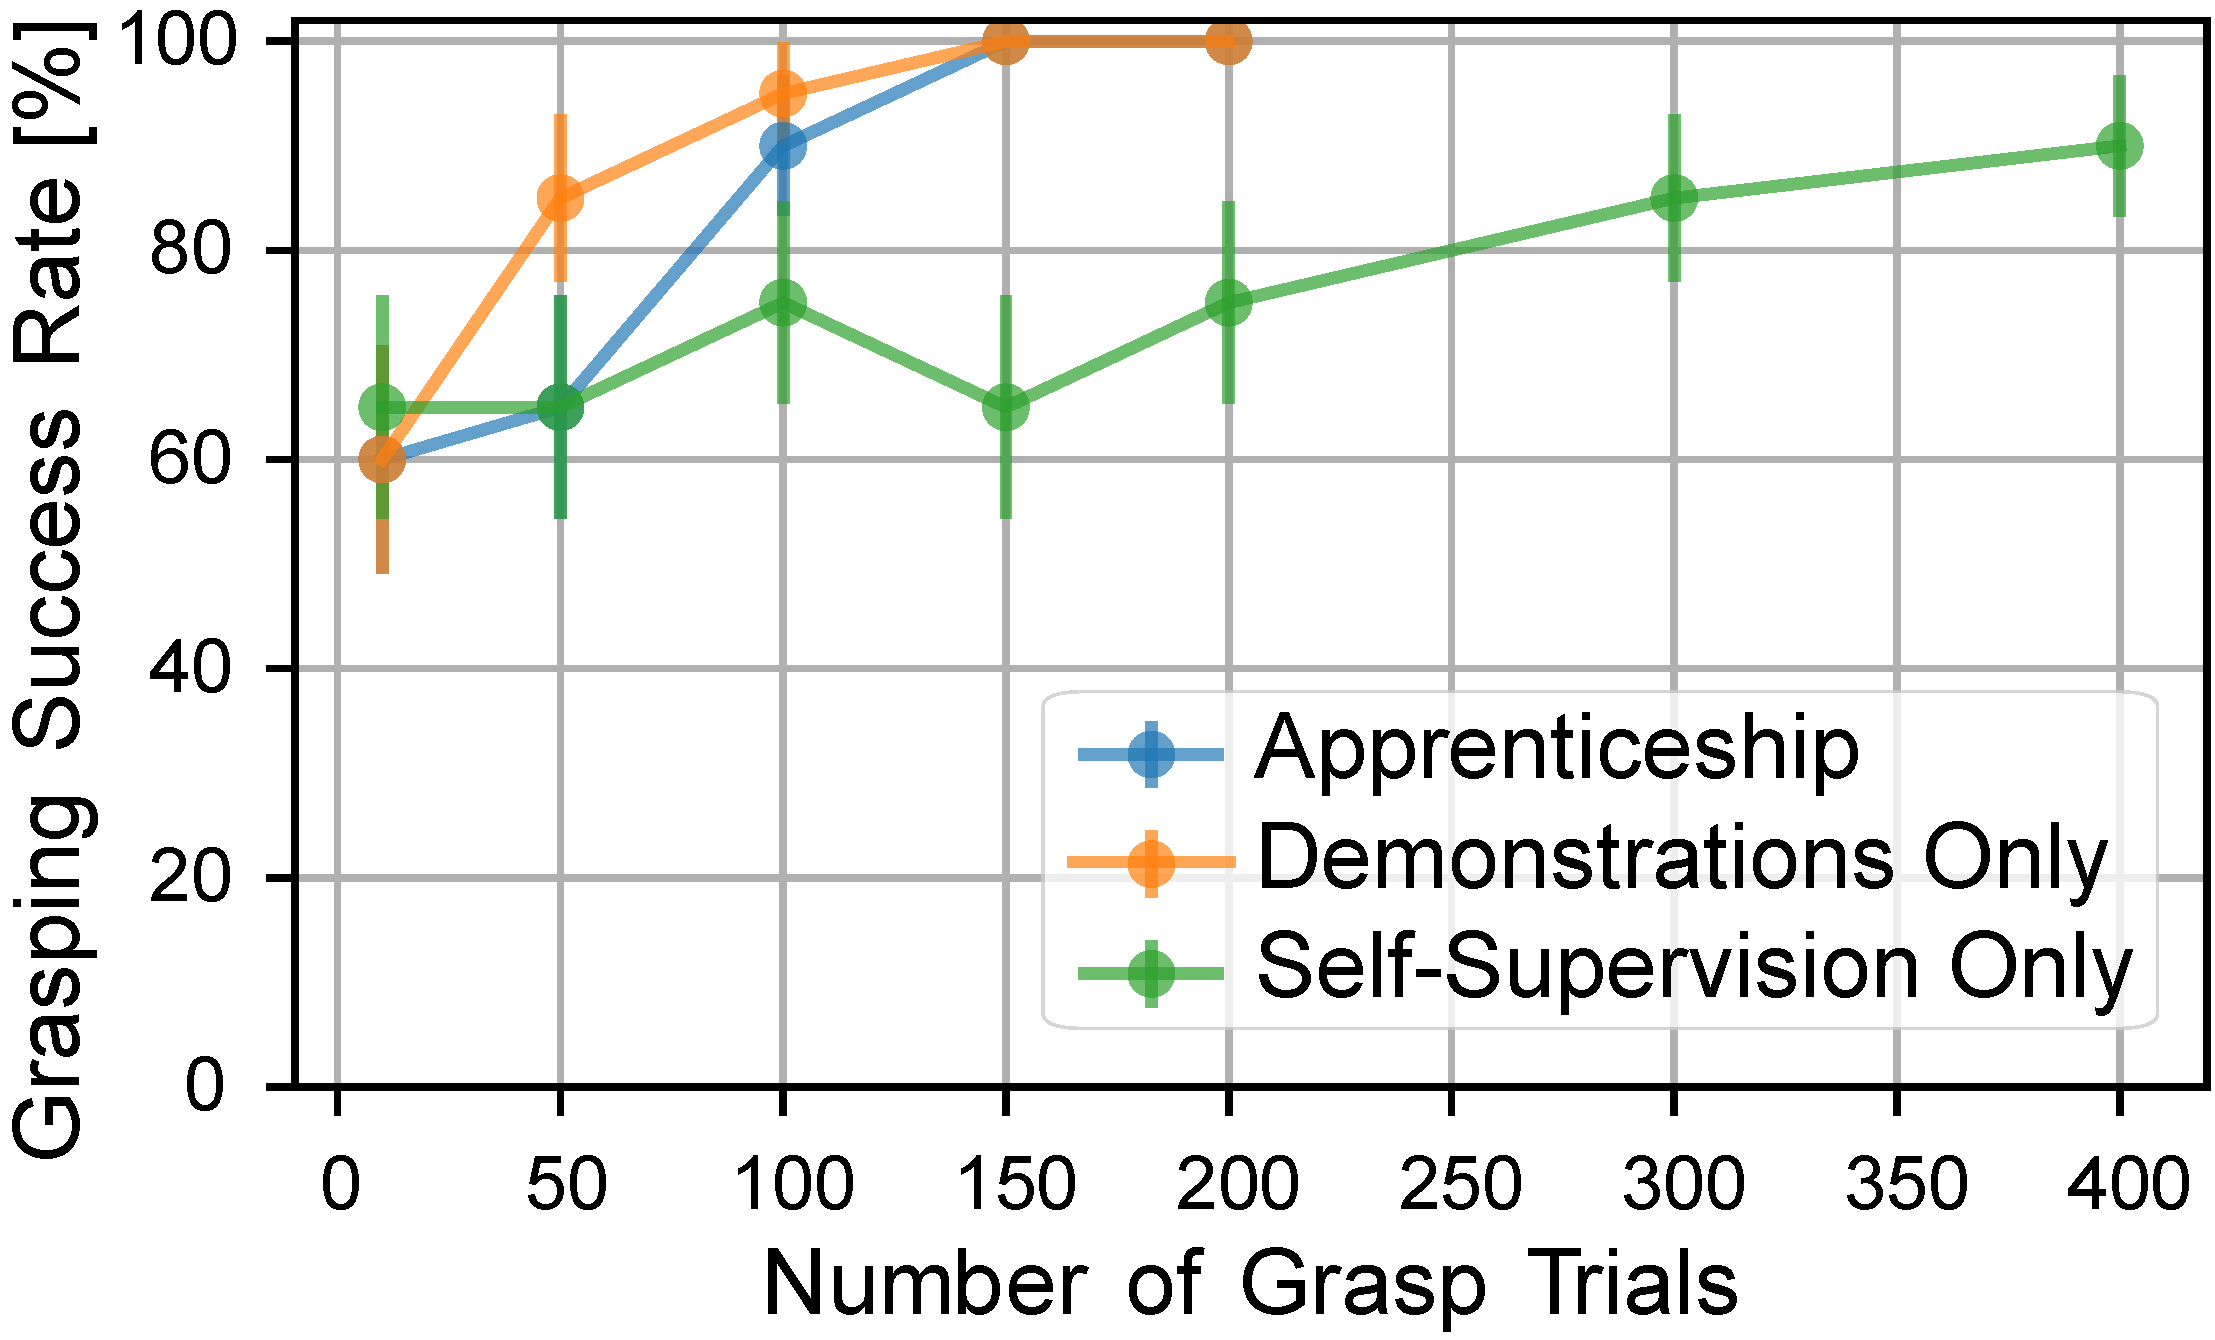 Including demonstrations in the learning process improves learning speed when compared to only learning via self-supervision.